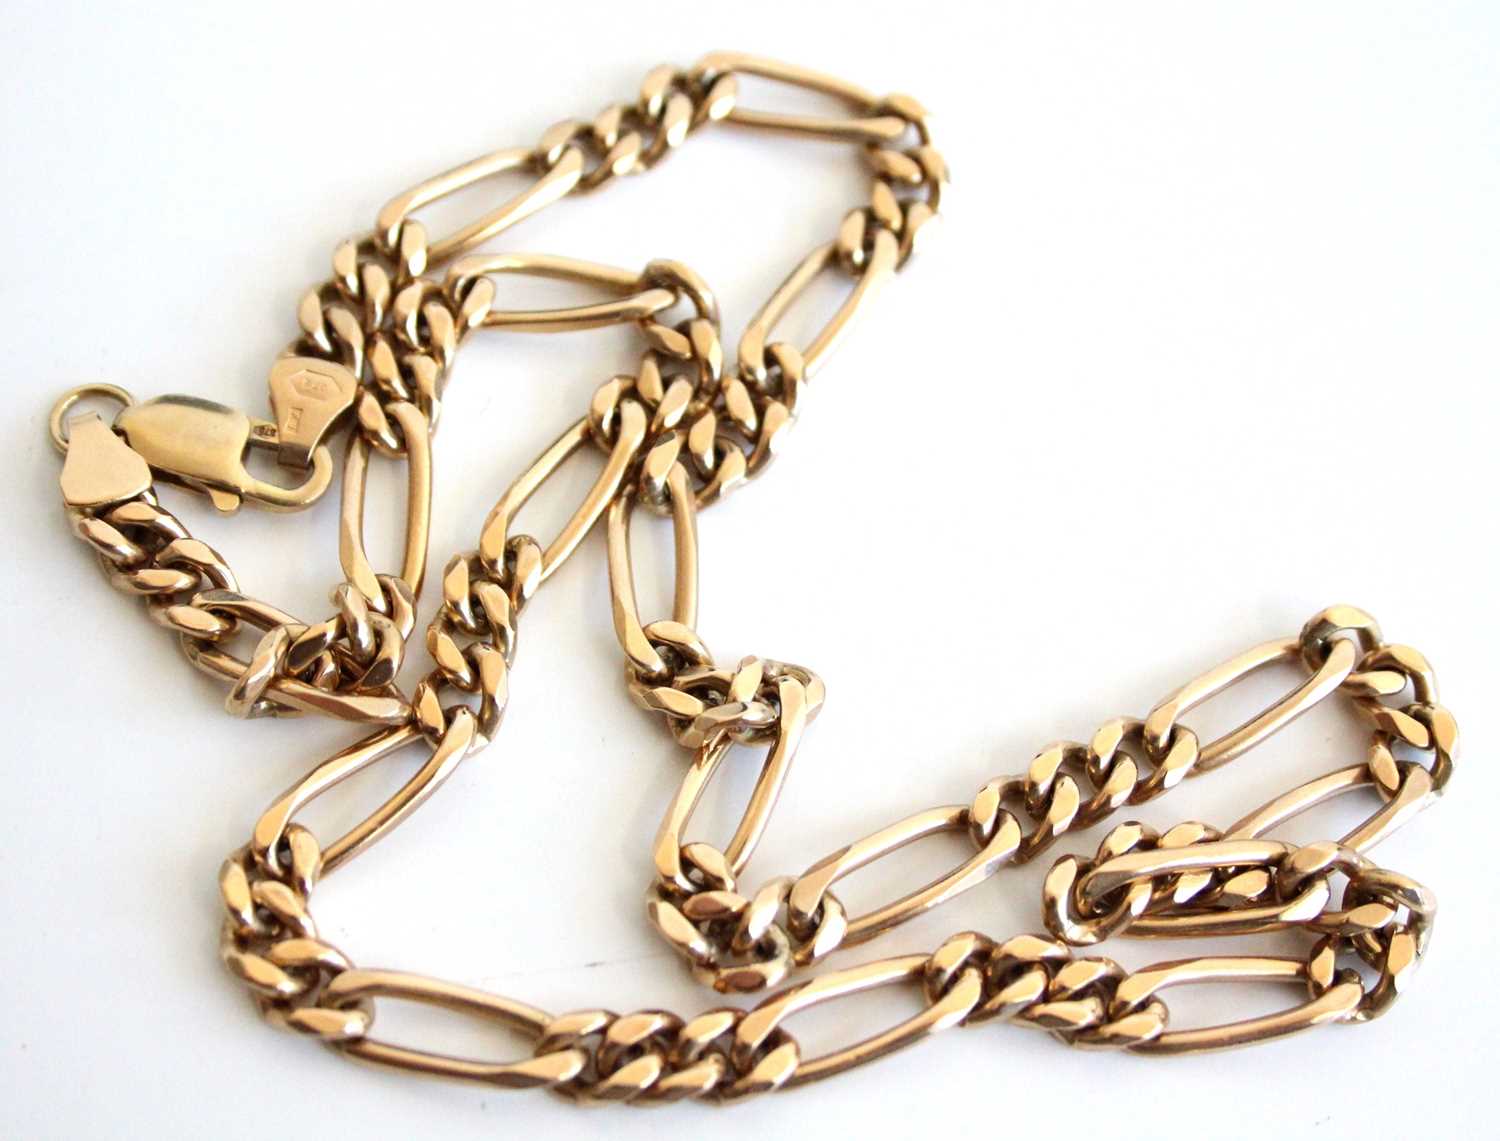 A 9ct gold figaro link neck chain, sponsor RJ, 44g, length 53cm In excellent condition with no - Image 2 of 3